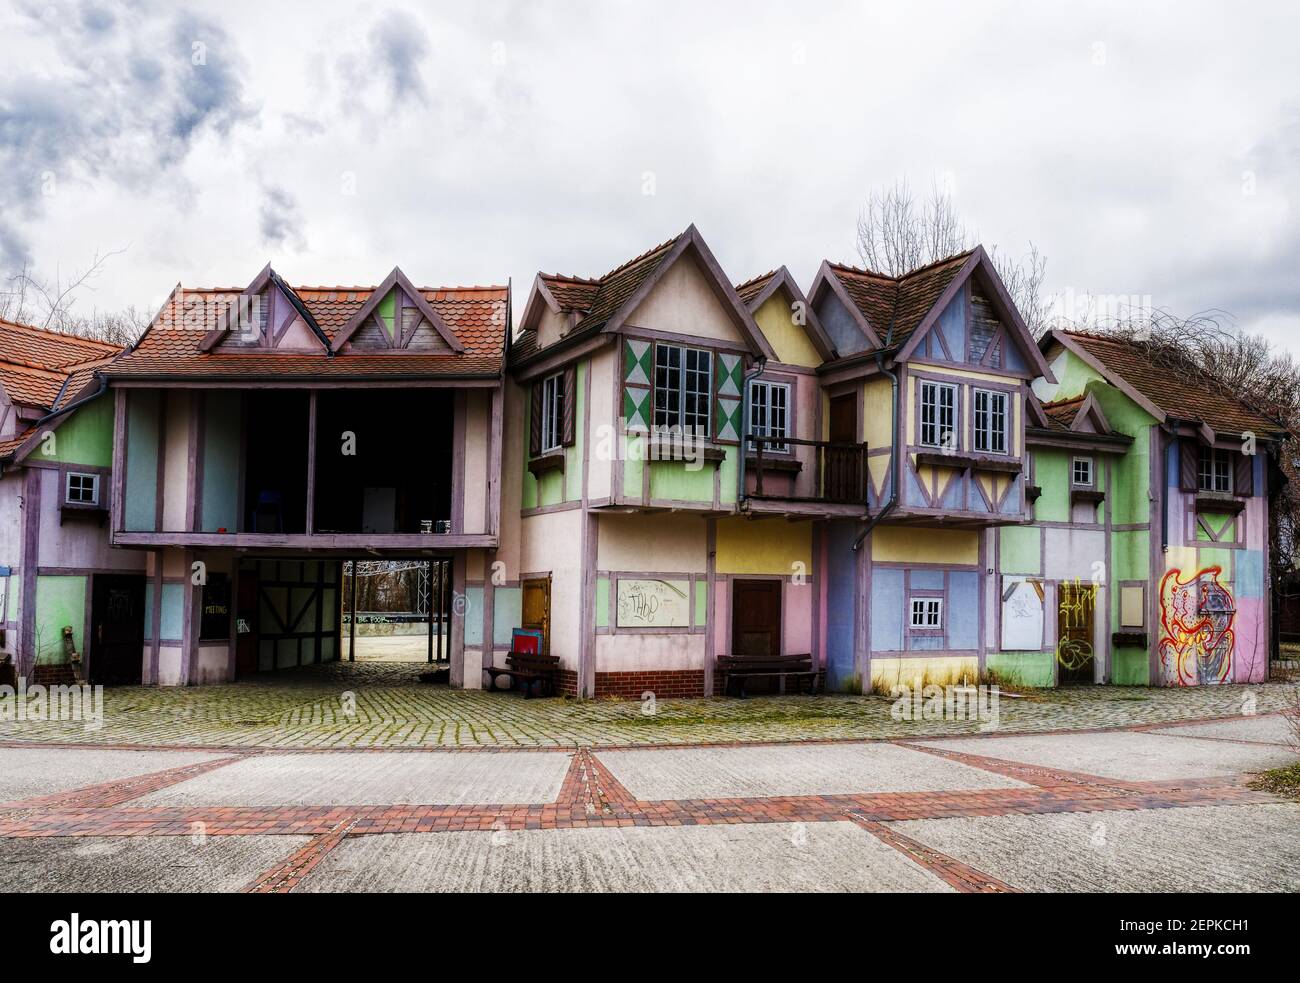 Boarded up buildings in the abandoned Spreepark amusement park in Berlin, Germany Stock Photo